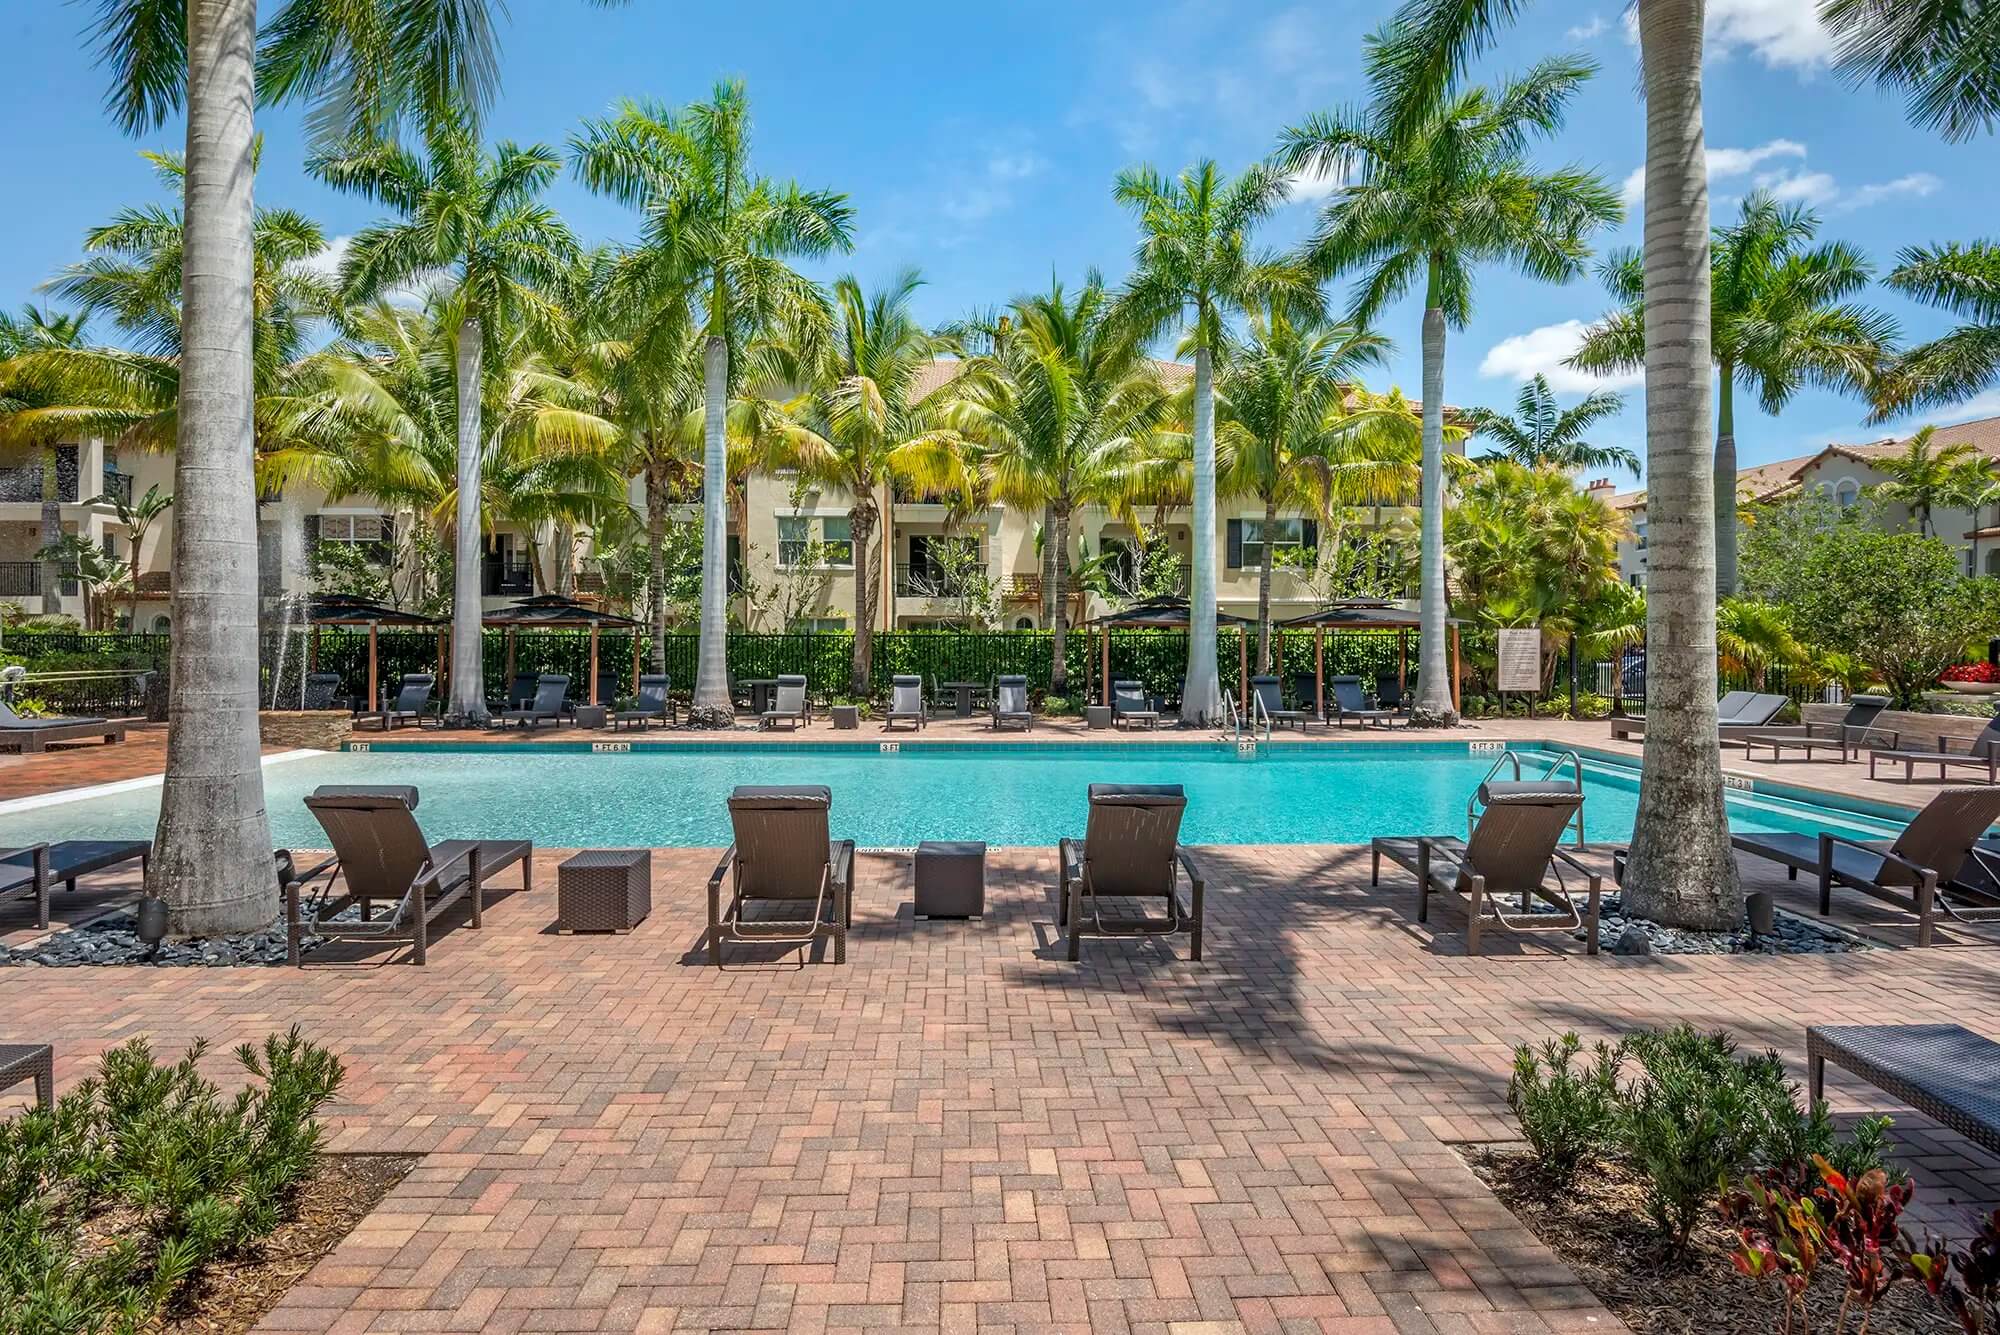 Pool deck with reclining seat surrounded by palm trees